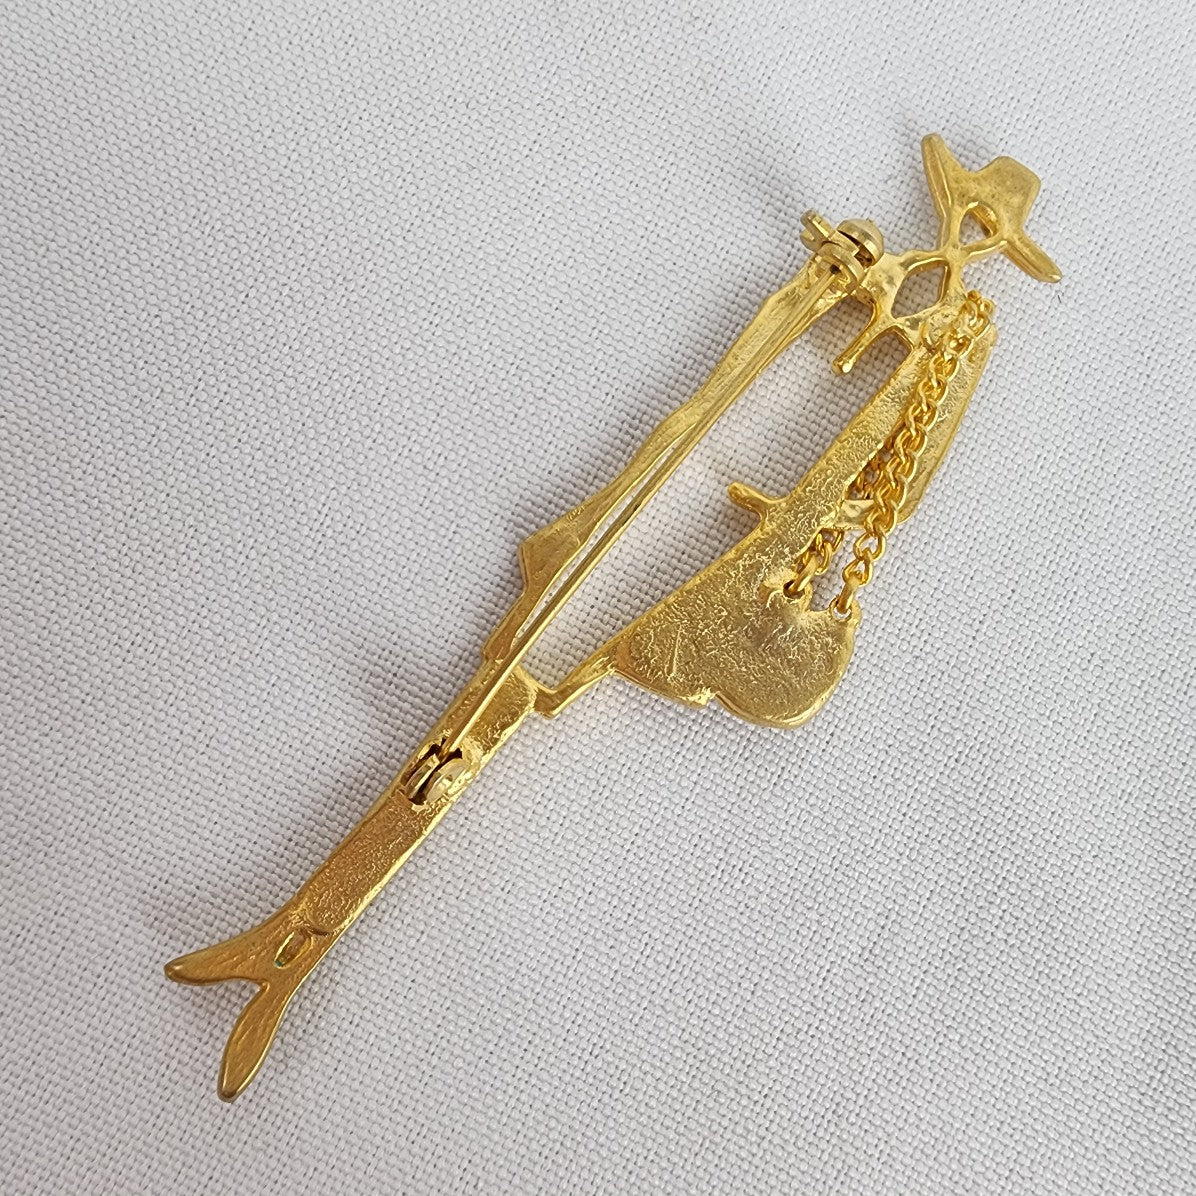 Vintage Gold Tone Lady With Purse Brooch